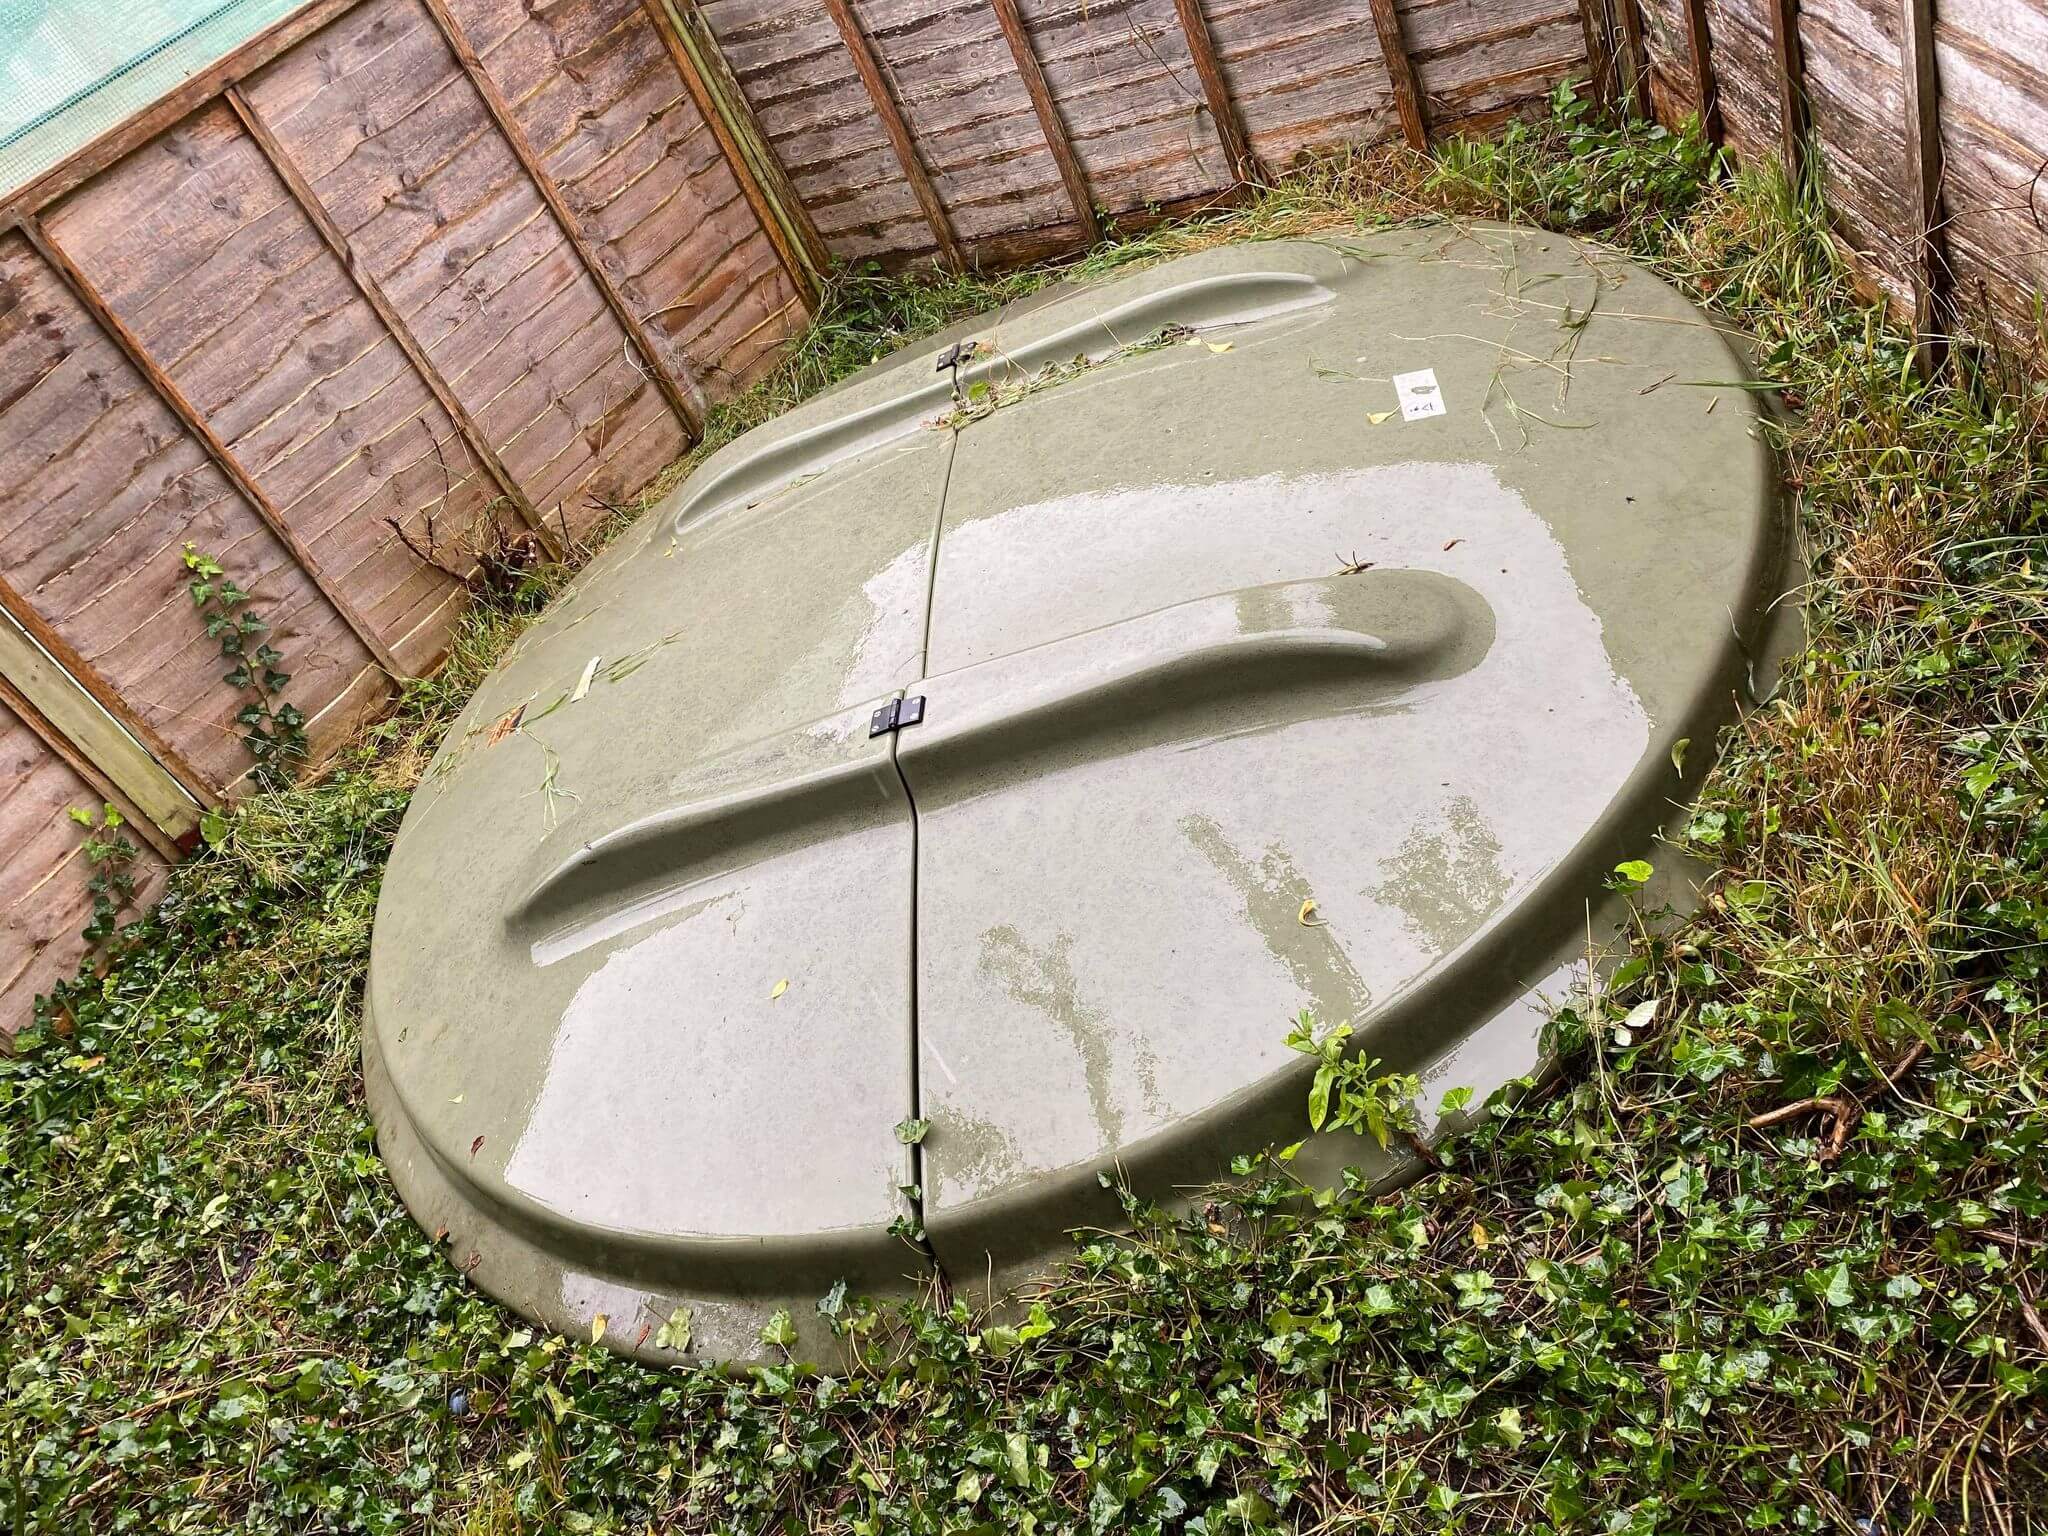 Septic tank cover. Simpsons Drainage, Drain clearance, drain unblocking, septic tank services, septic tank emptying, drain camera surveys, drain repairs, drain lining, new drains in Warminster, Frome, Trowbridge.